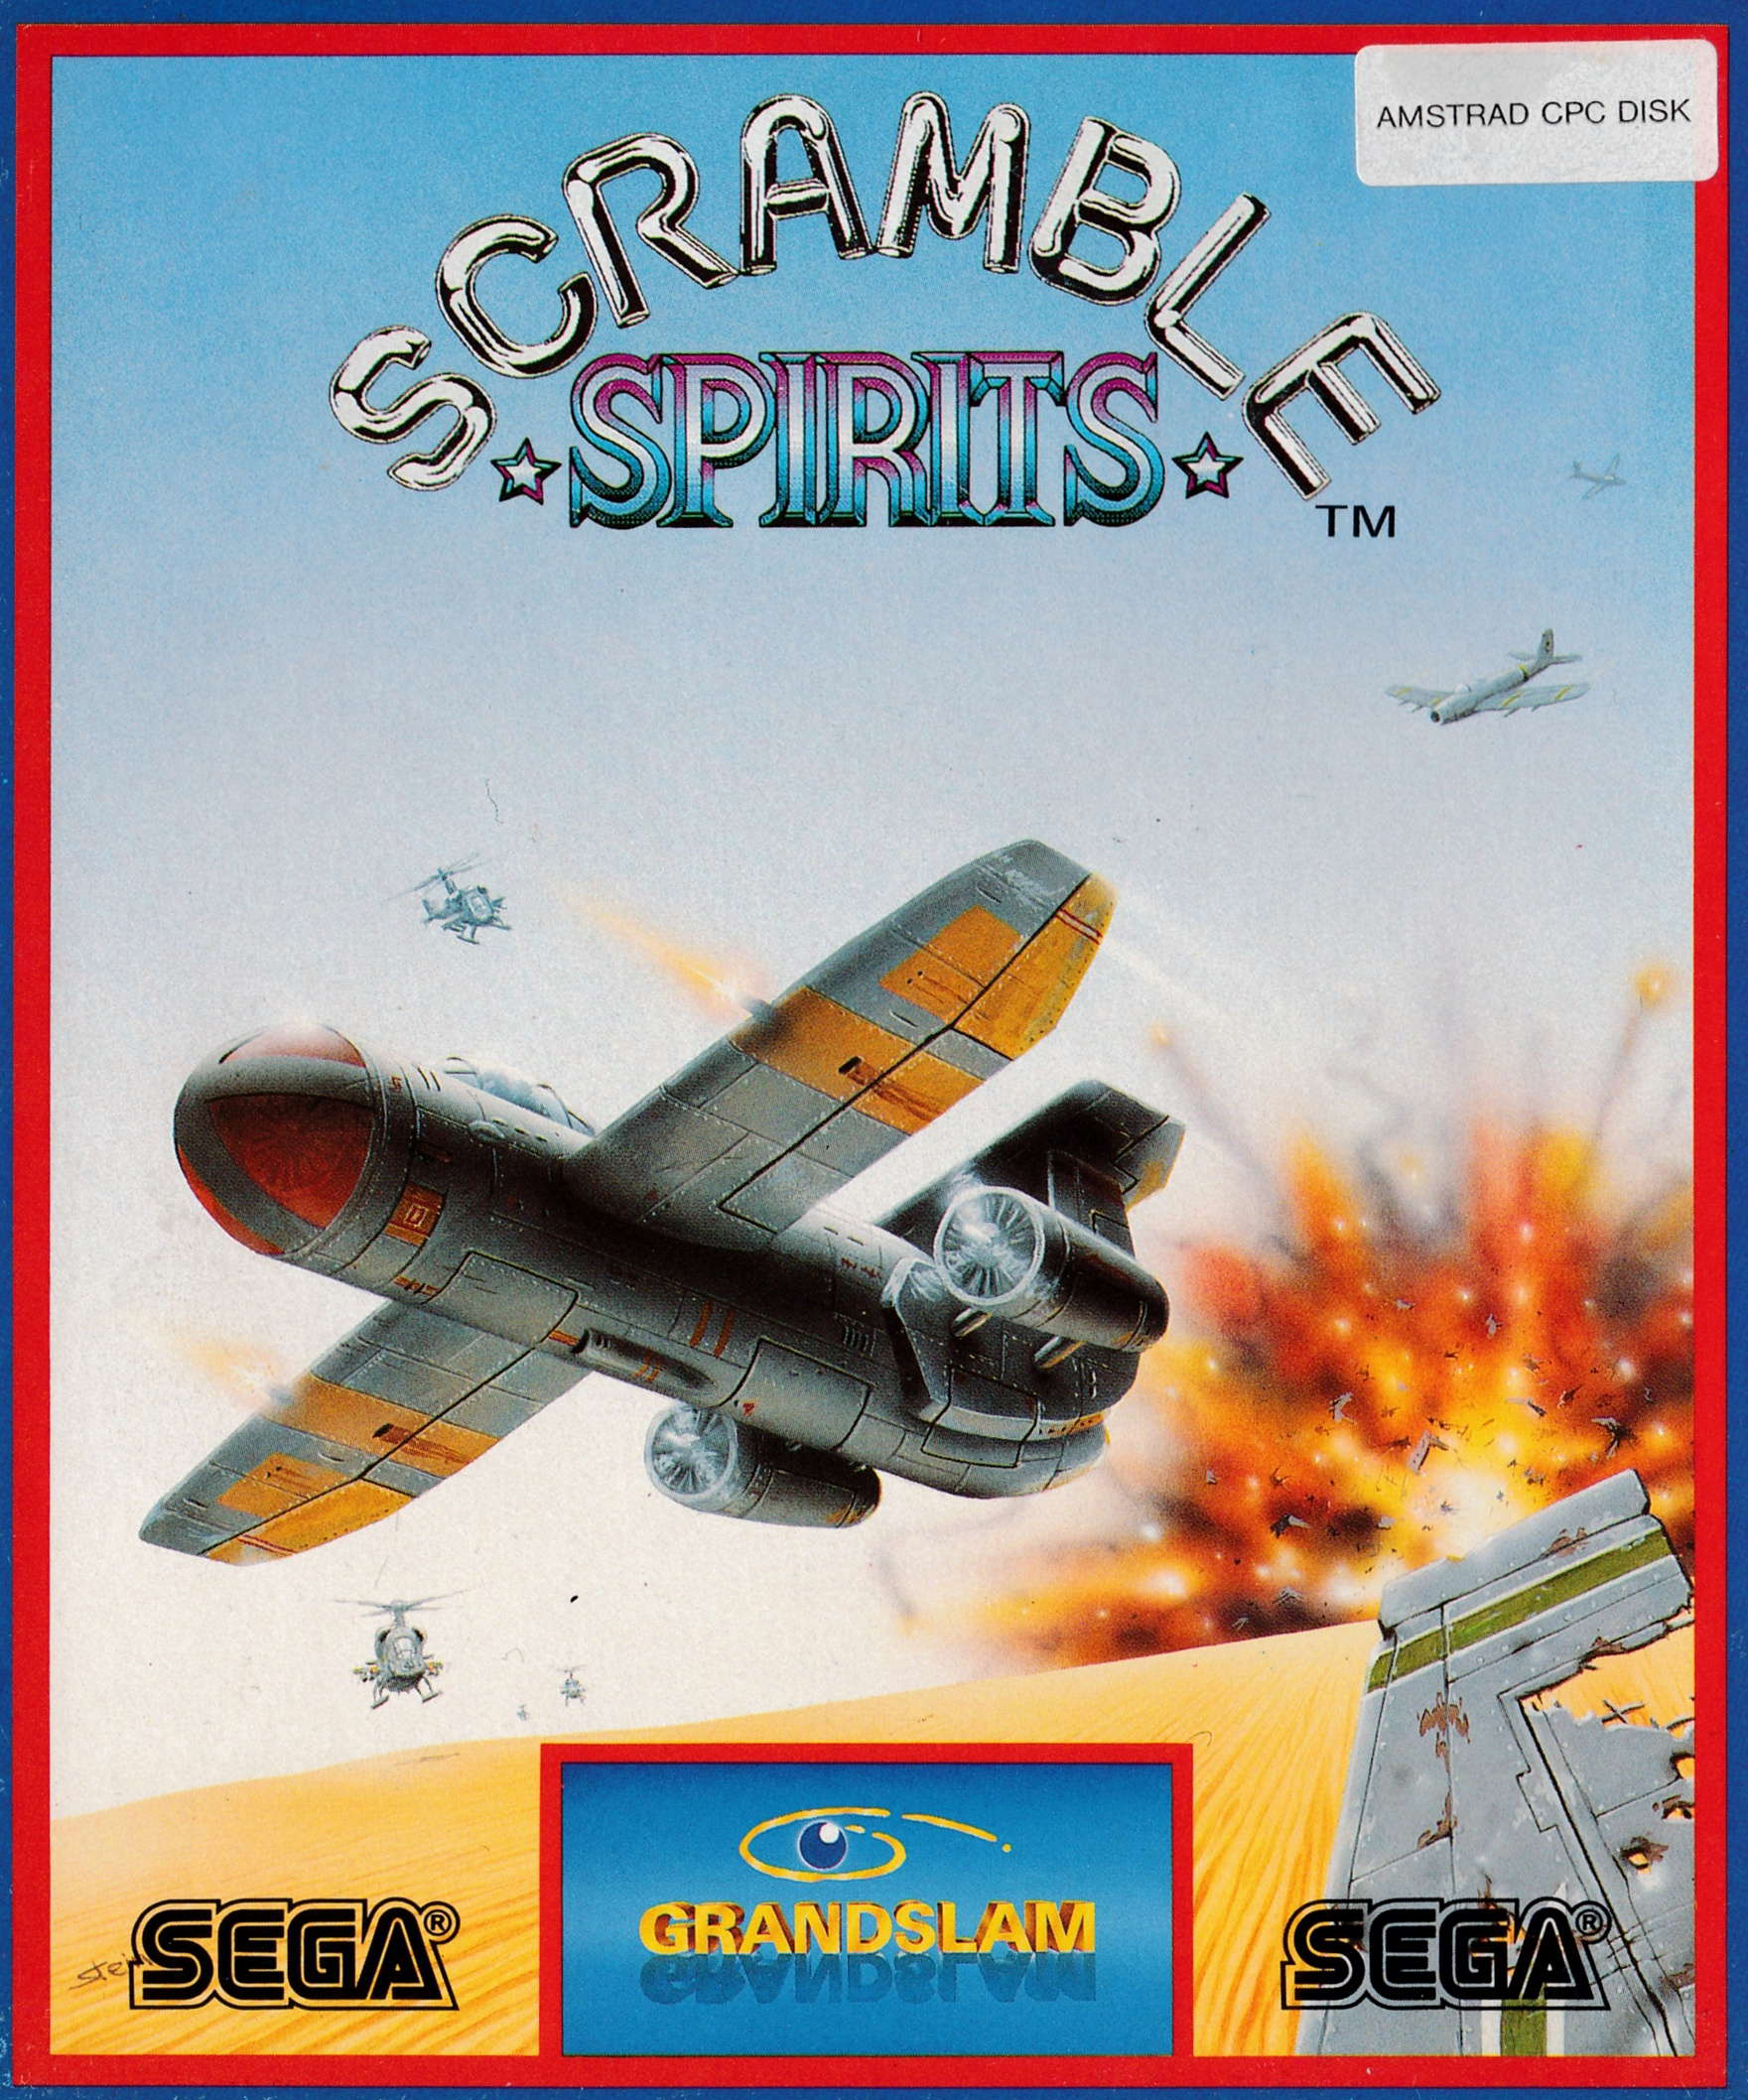 cover of the Amstrad CPC game Scramble Spirits  by GameBase CPC